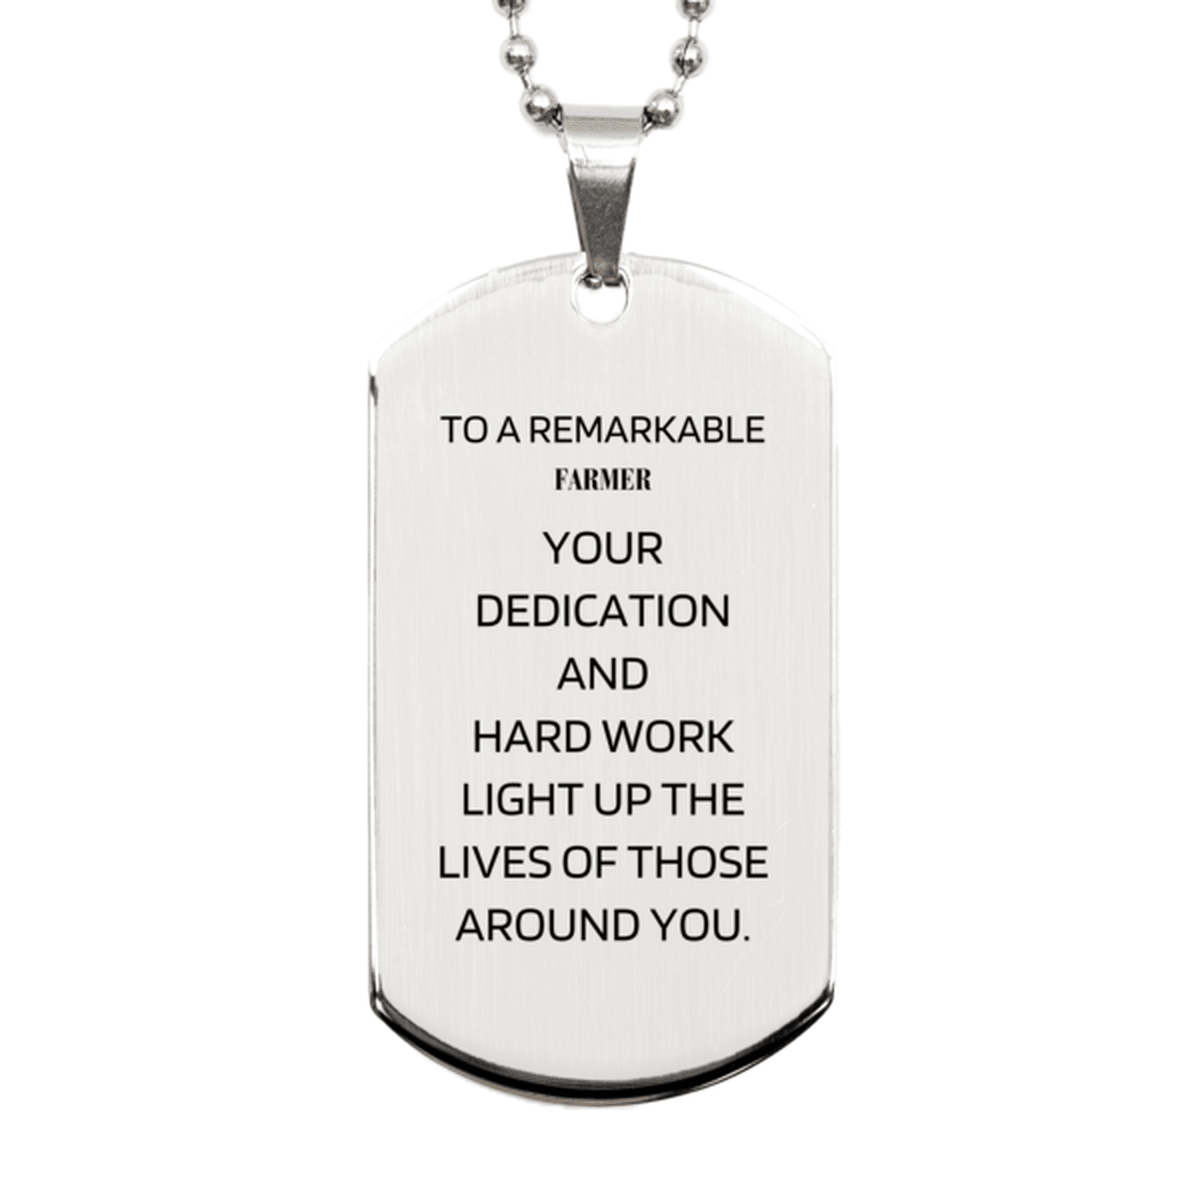 Remarkable Farmer Gifts, Your dedication and hard work, Inspirational Birthday Christmas Unique Silver Dog Tag For Farmer, Coworkers, Men, Women, Friends - Mallard Moon Gift Shop